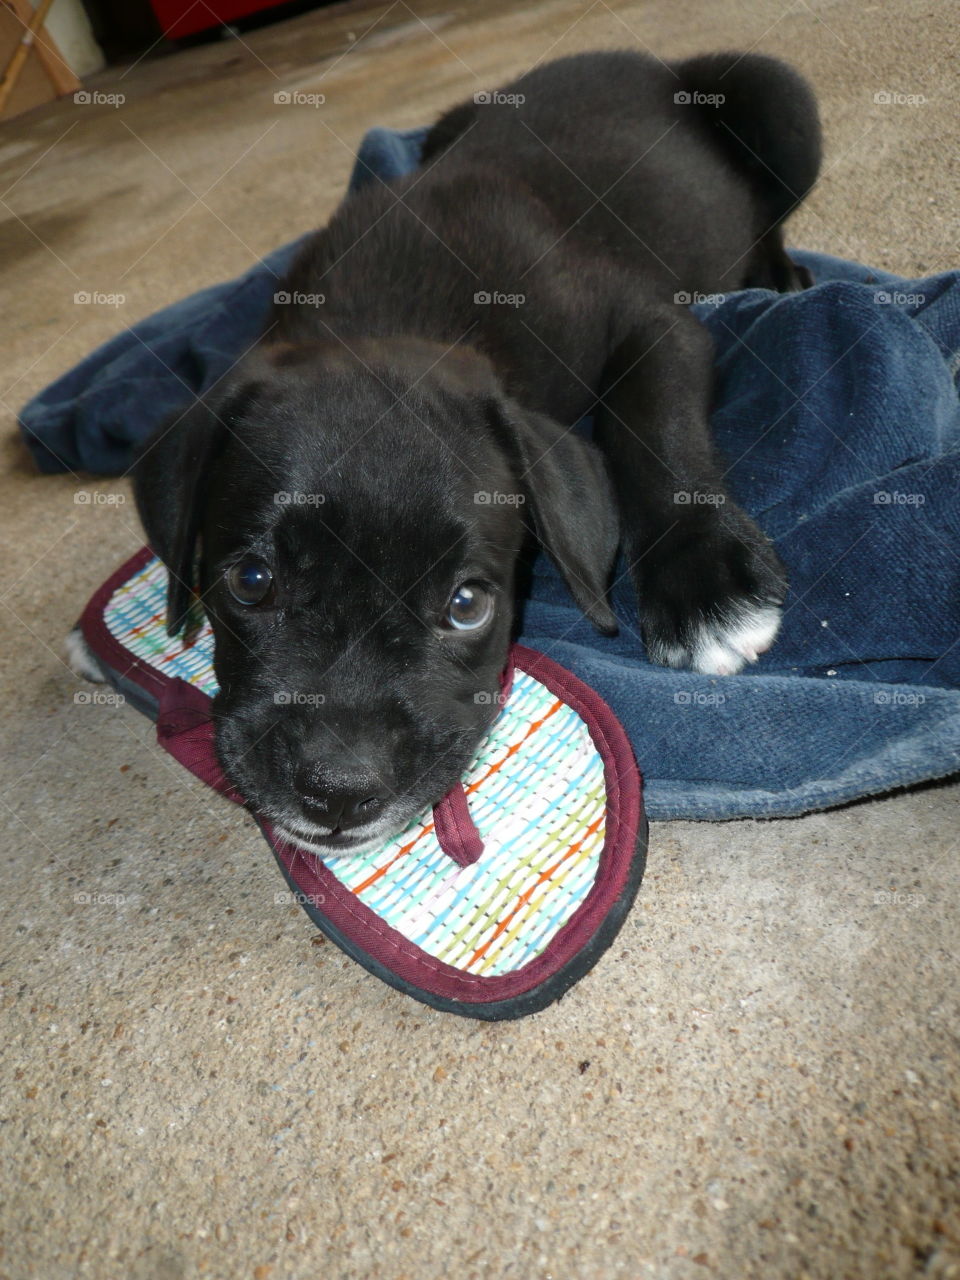 puppy chewing on his favorite "toy": the flip flop